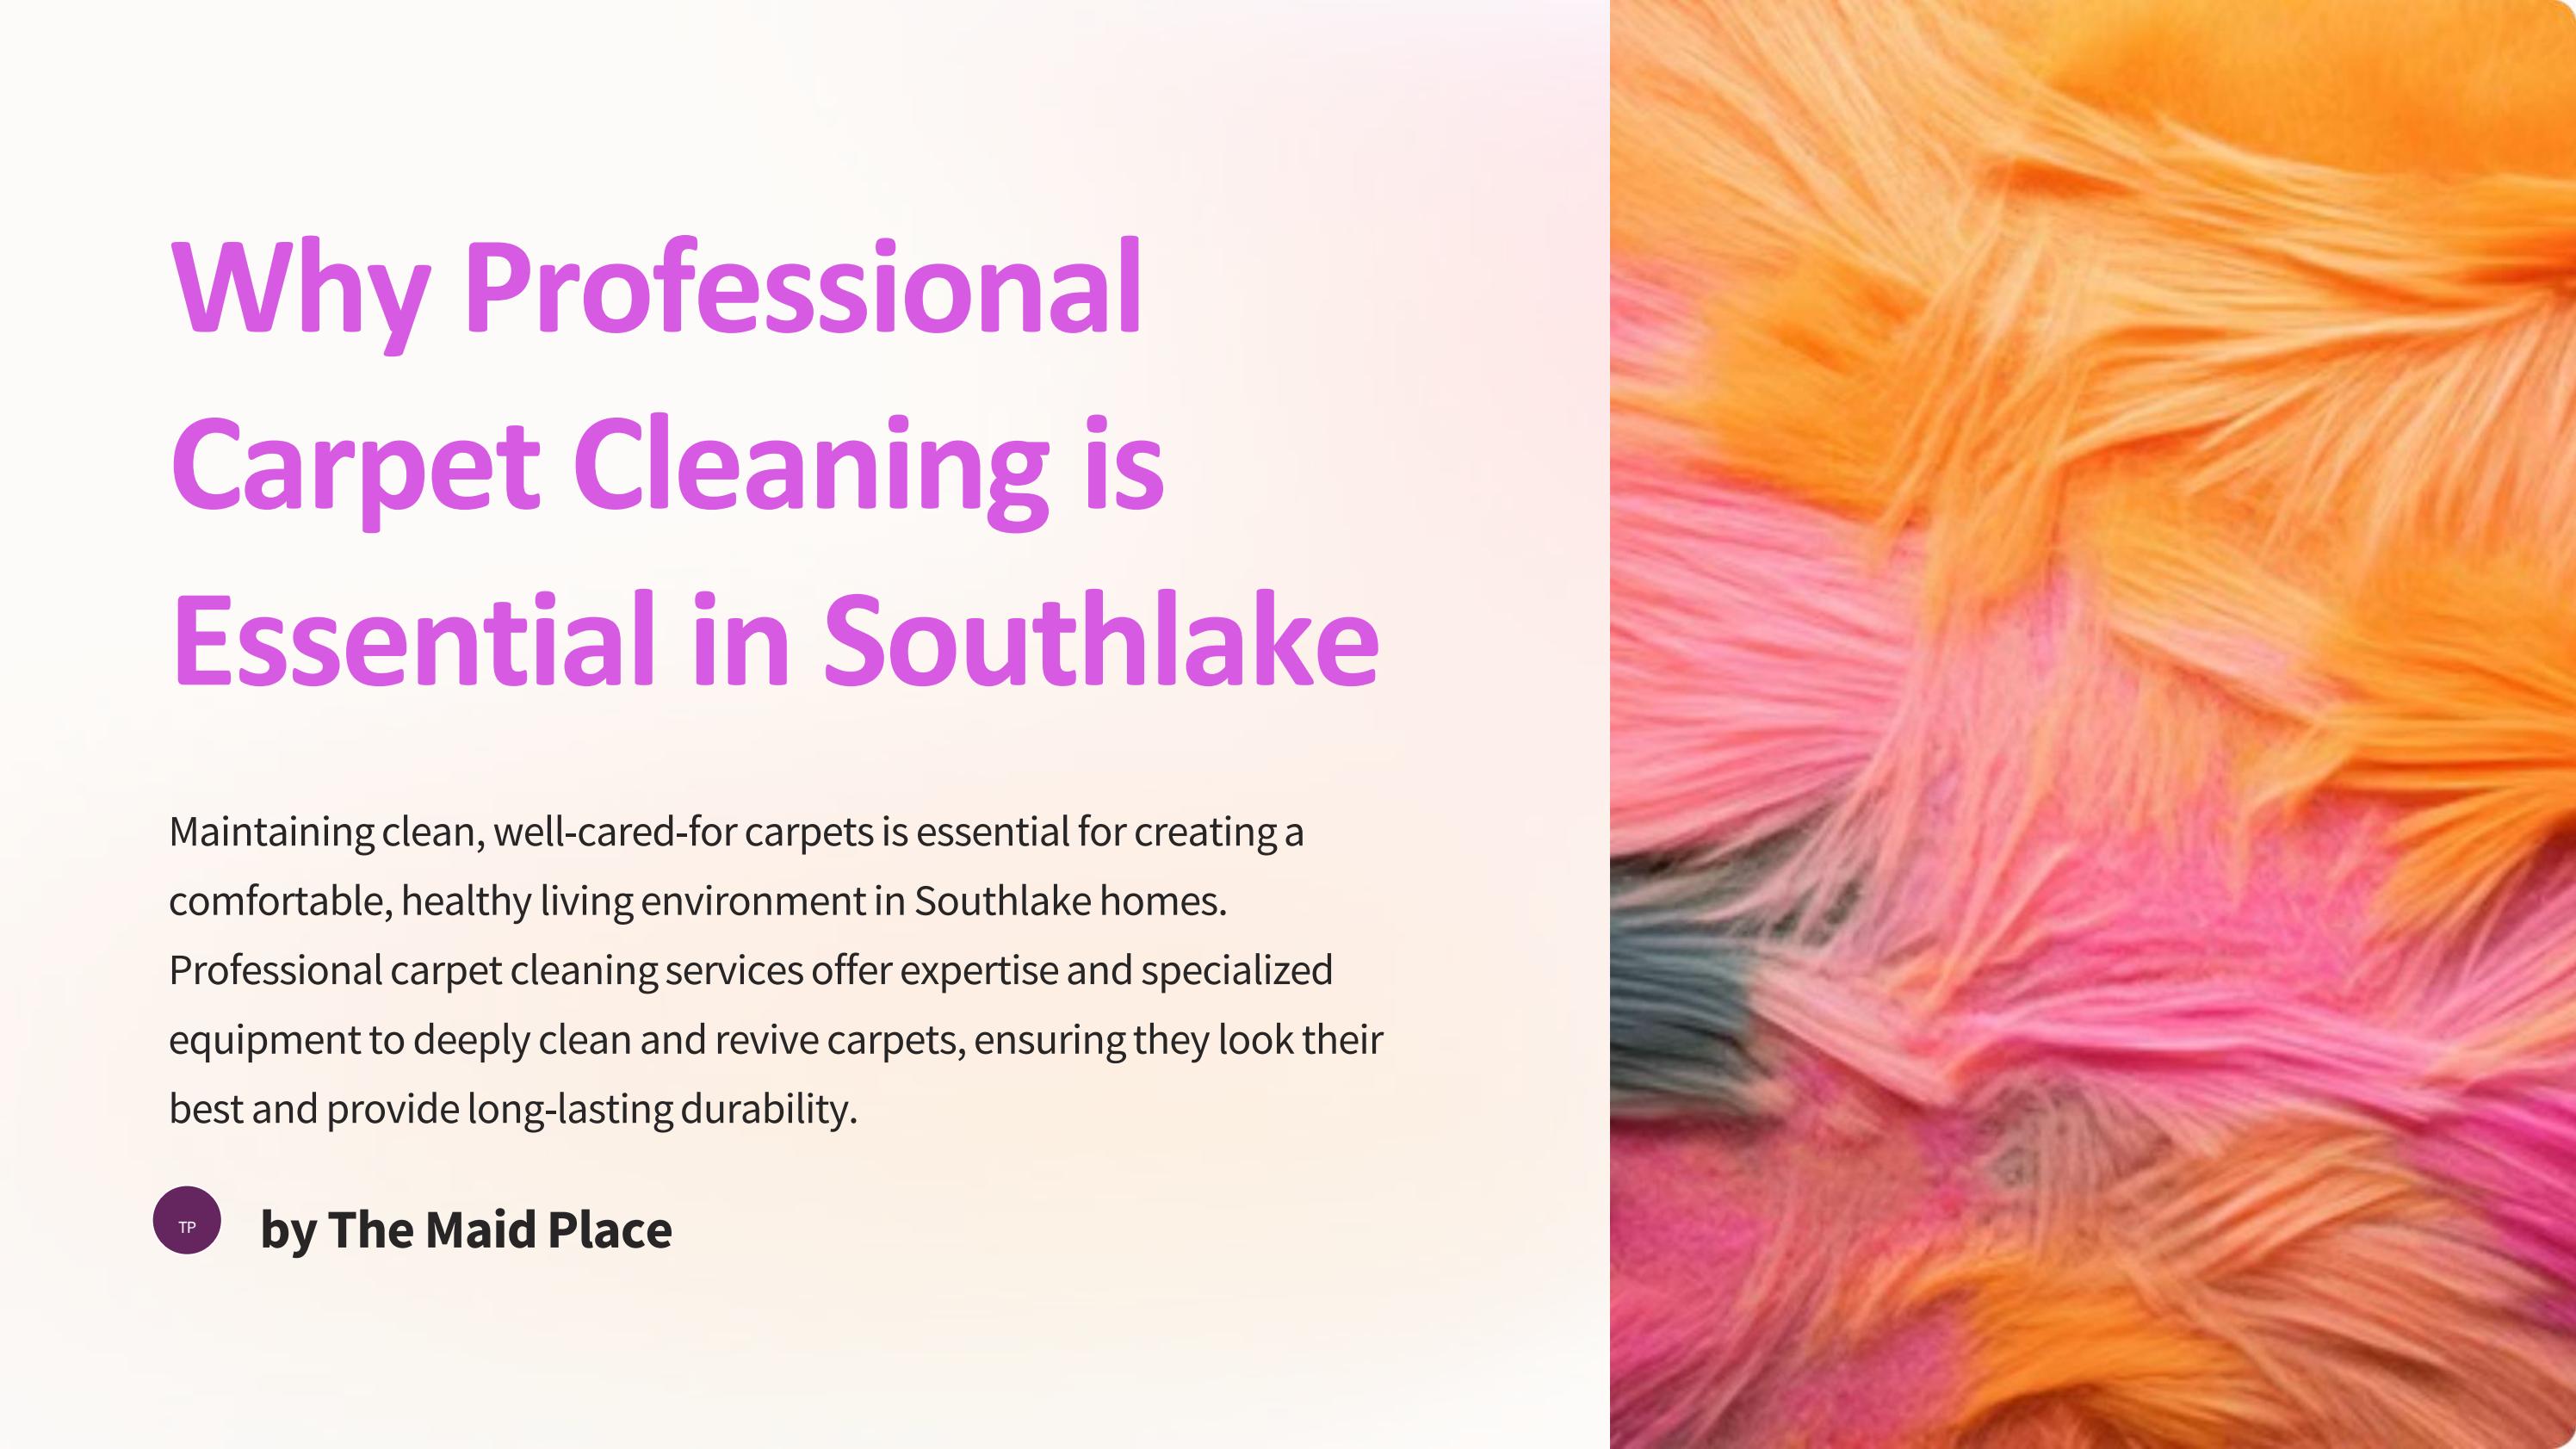 Why Professional Carpet Cleaning is Essential in Southlake